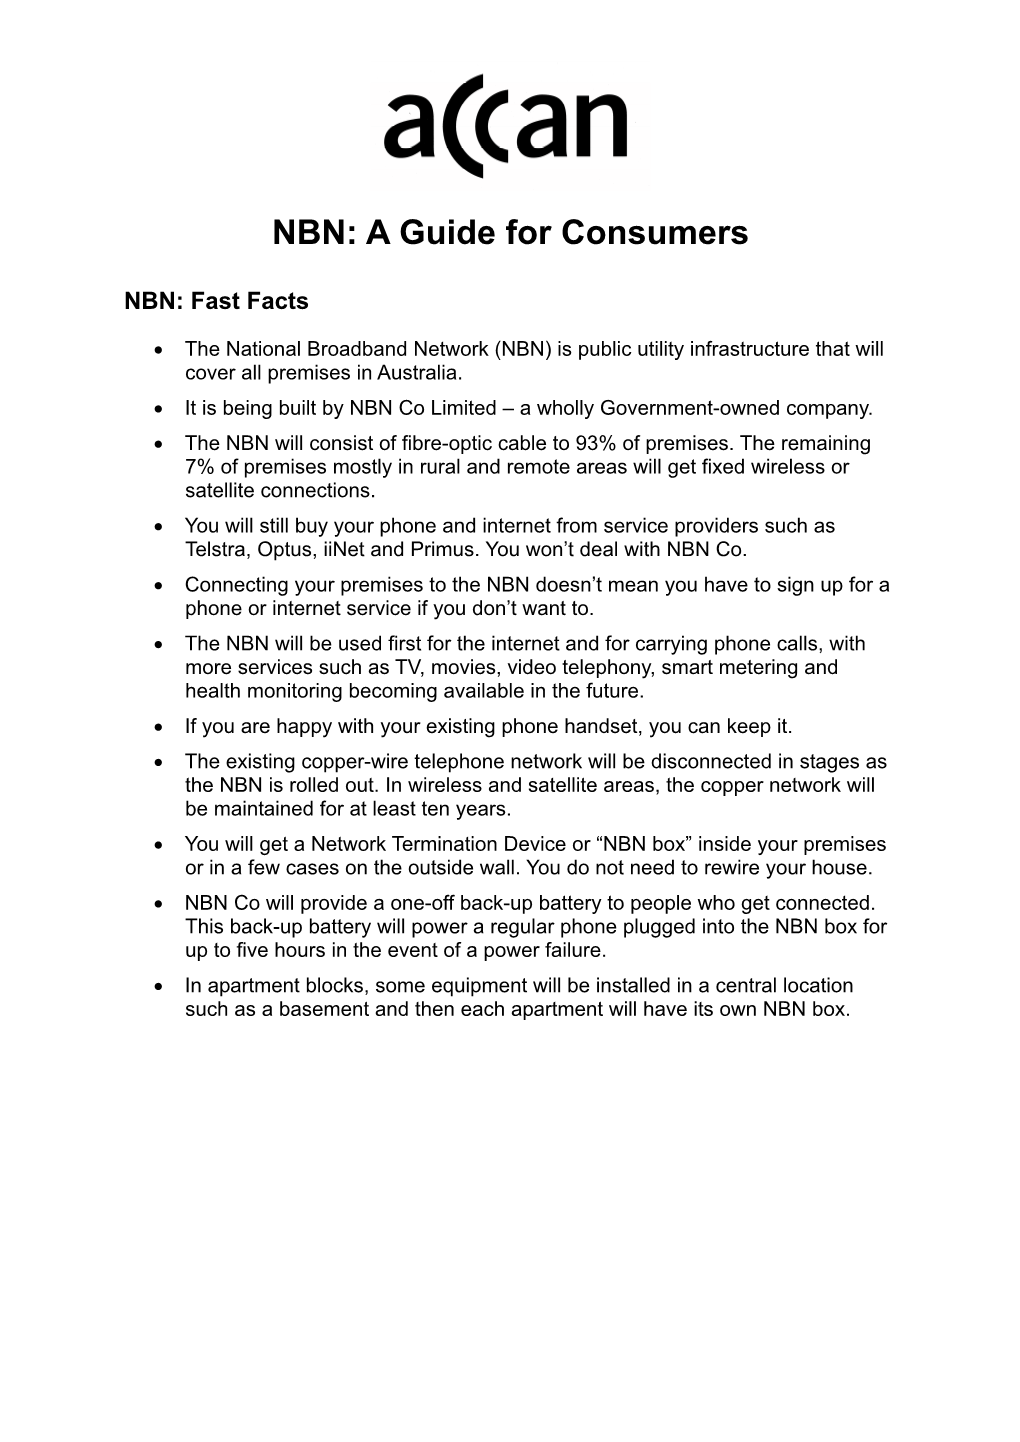 NBN: a Guide for Consumers